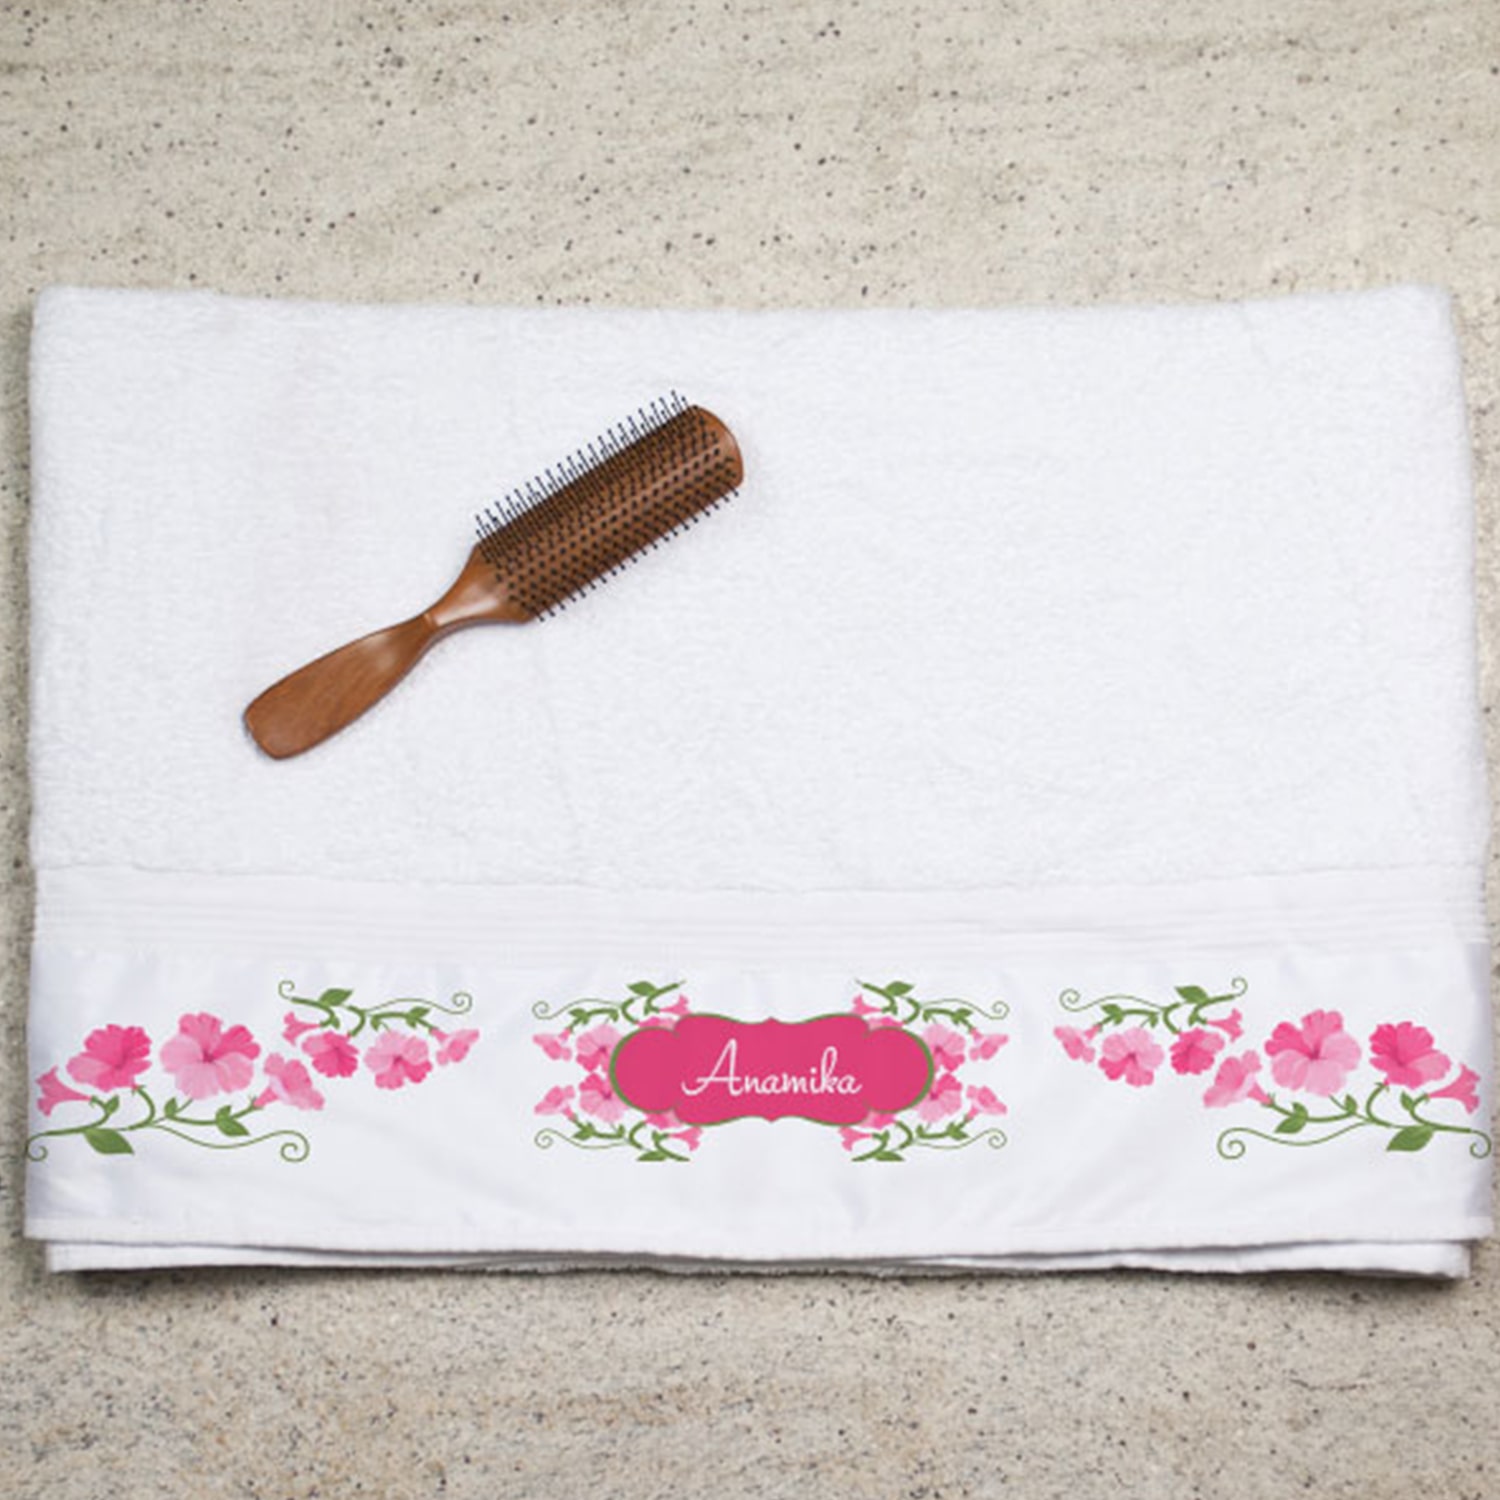 Personalized Bath Towel For Her